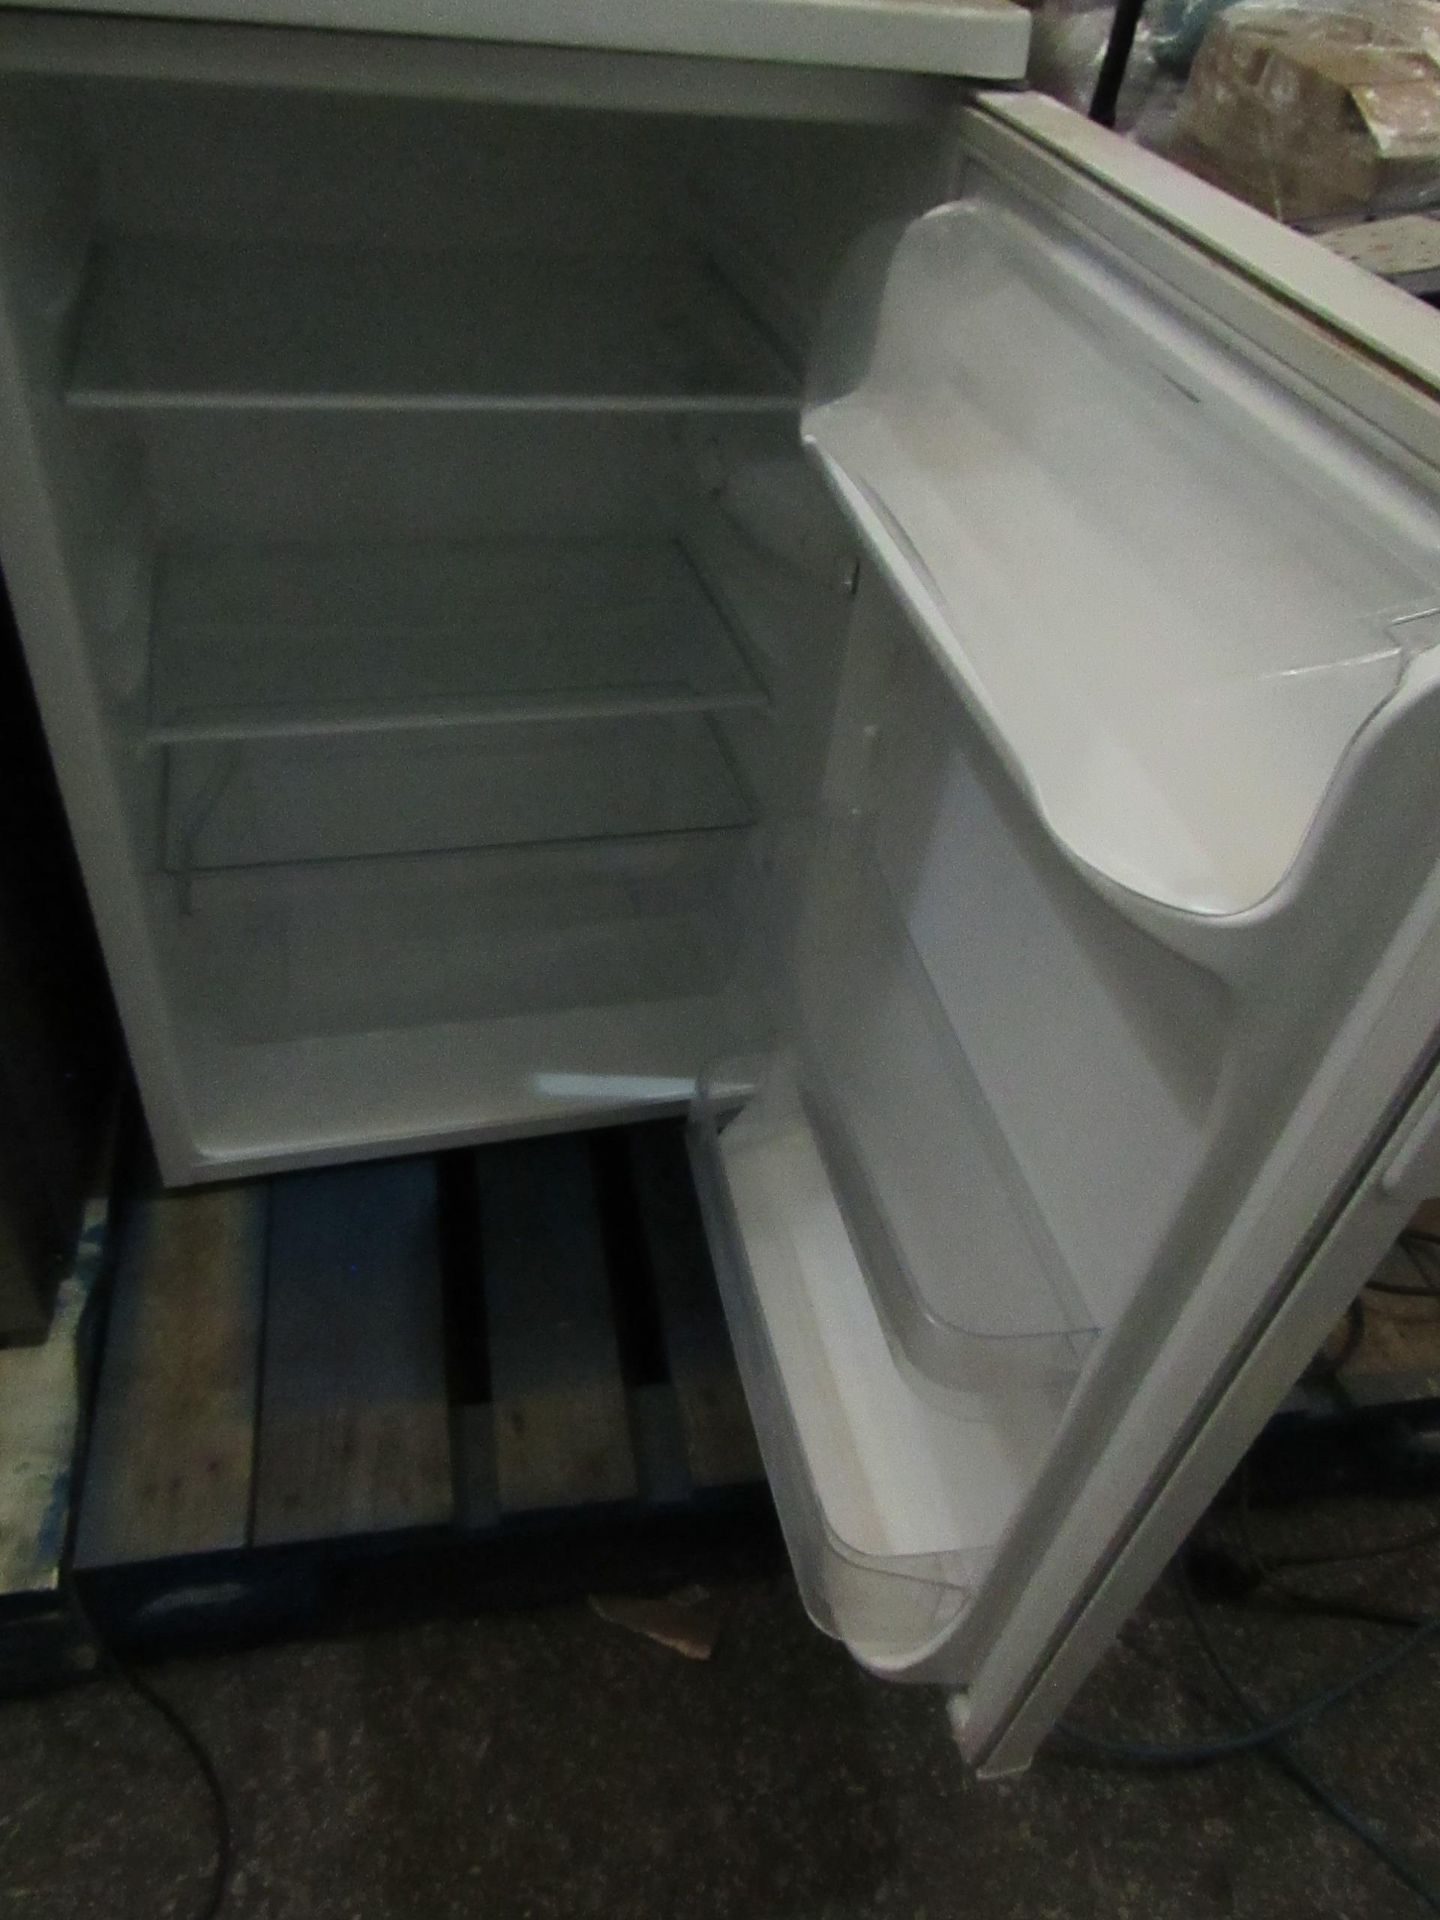 Zanussi under counter freestanding fridge, tested working for coldness - Image 3 of 4